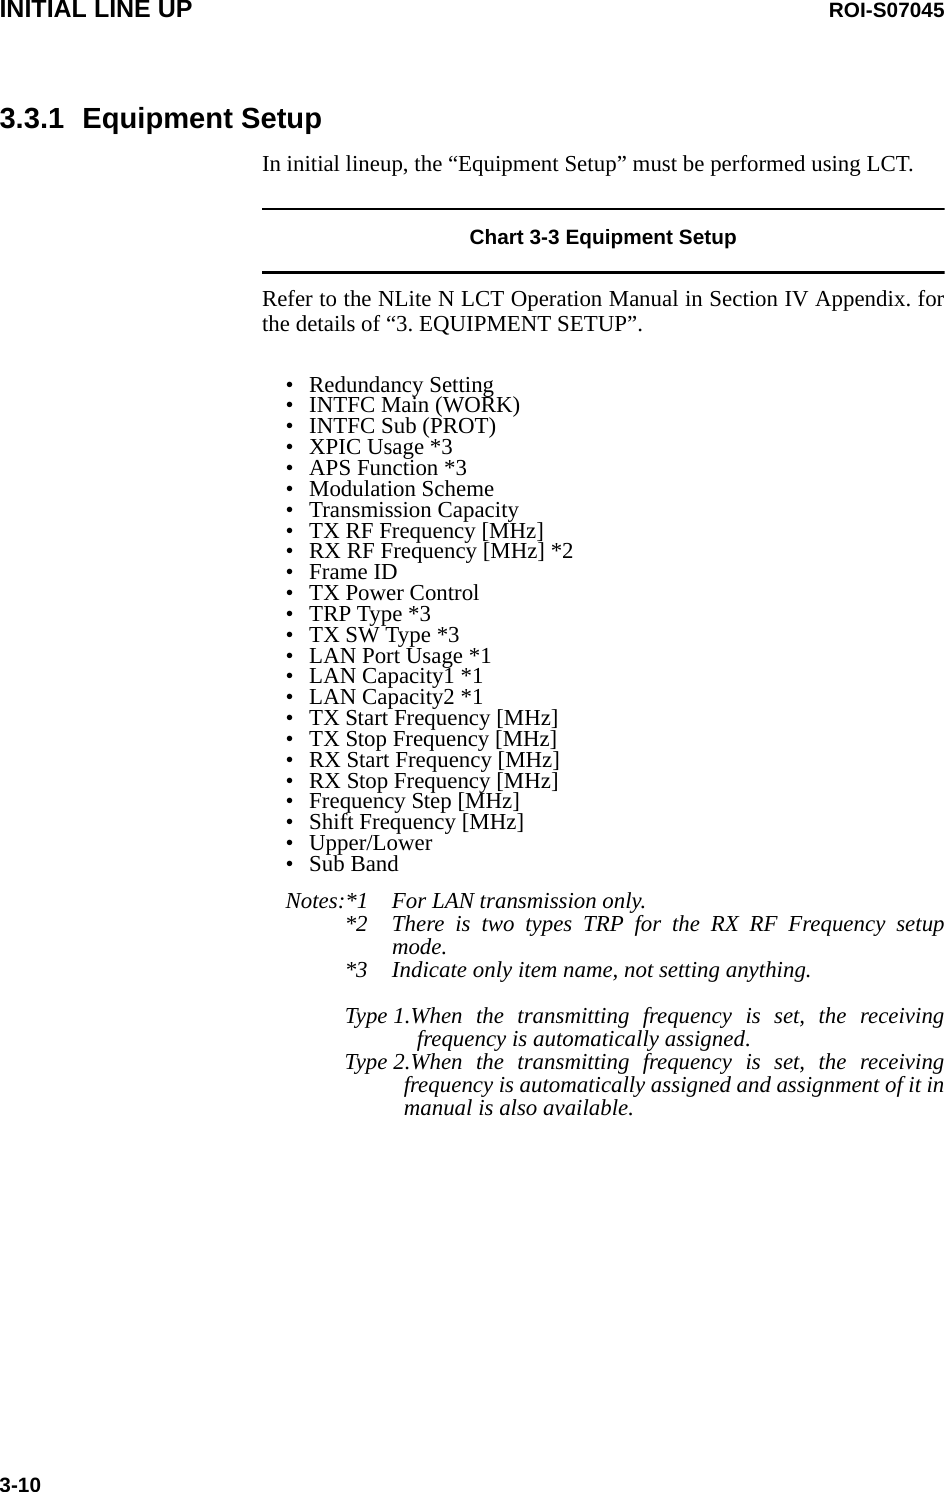 INITIAL LINE UP ROI-S070453-103.3.1 Equipment SetupIn initial lineup, the “Equipment Setup” must be performed using LCT.Chart 3-3 Equipment SetupRefer to the NLite N LCT Operation Manual in Section IV Appendix. forthe details of “3. EQUIPMENT SETUP”. • Redundancy Setting• INTFC Main (WORK) • INTFC Sub (PROT) •XPIC Usage *3• APS Function *3• Modulation Scheme• Transmission Capacity• TX RF Frequency [MHz]• RX RF Frequency [MHz] *2• Frame ID• TX Power Control•TRP Type *3• TX SW Type *3• LAN Port Usage *1• LAN Capacity1 *1• LAN Capacity2 *1• TX Start Frequency [MHz]• TX Stop Frequency [MHz]• RX Start Frequency [MHz]• RX Stop Frequency [MHz]• Frequency Step [MHz]• Shift Frequency [MHz]• Upper/Lower•Sub BandNotes:*1 For LAN transmission only.*2 There is two types TRP for the RX RF Frequency setupmode.*3 Indicate only item name, not setting anything.Type 1.When the transmitting frequency is set, the receivingfrequency is automatically assigned.Type 2.When the transmitting frequency is set, the receivingfrequency is automatically assigned and assignment of it inmanual is also available.